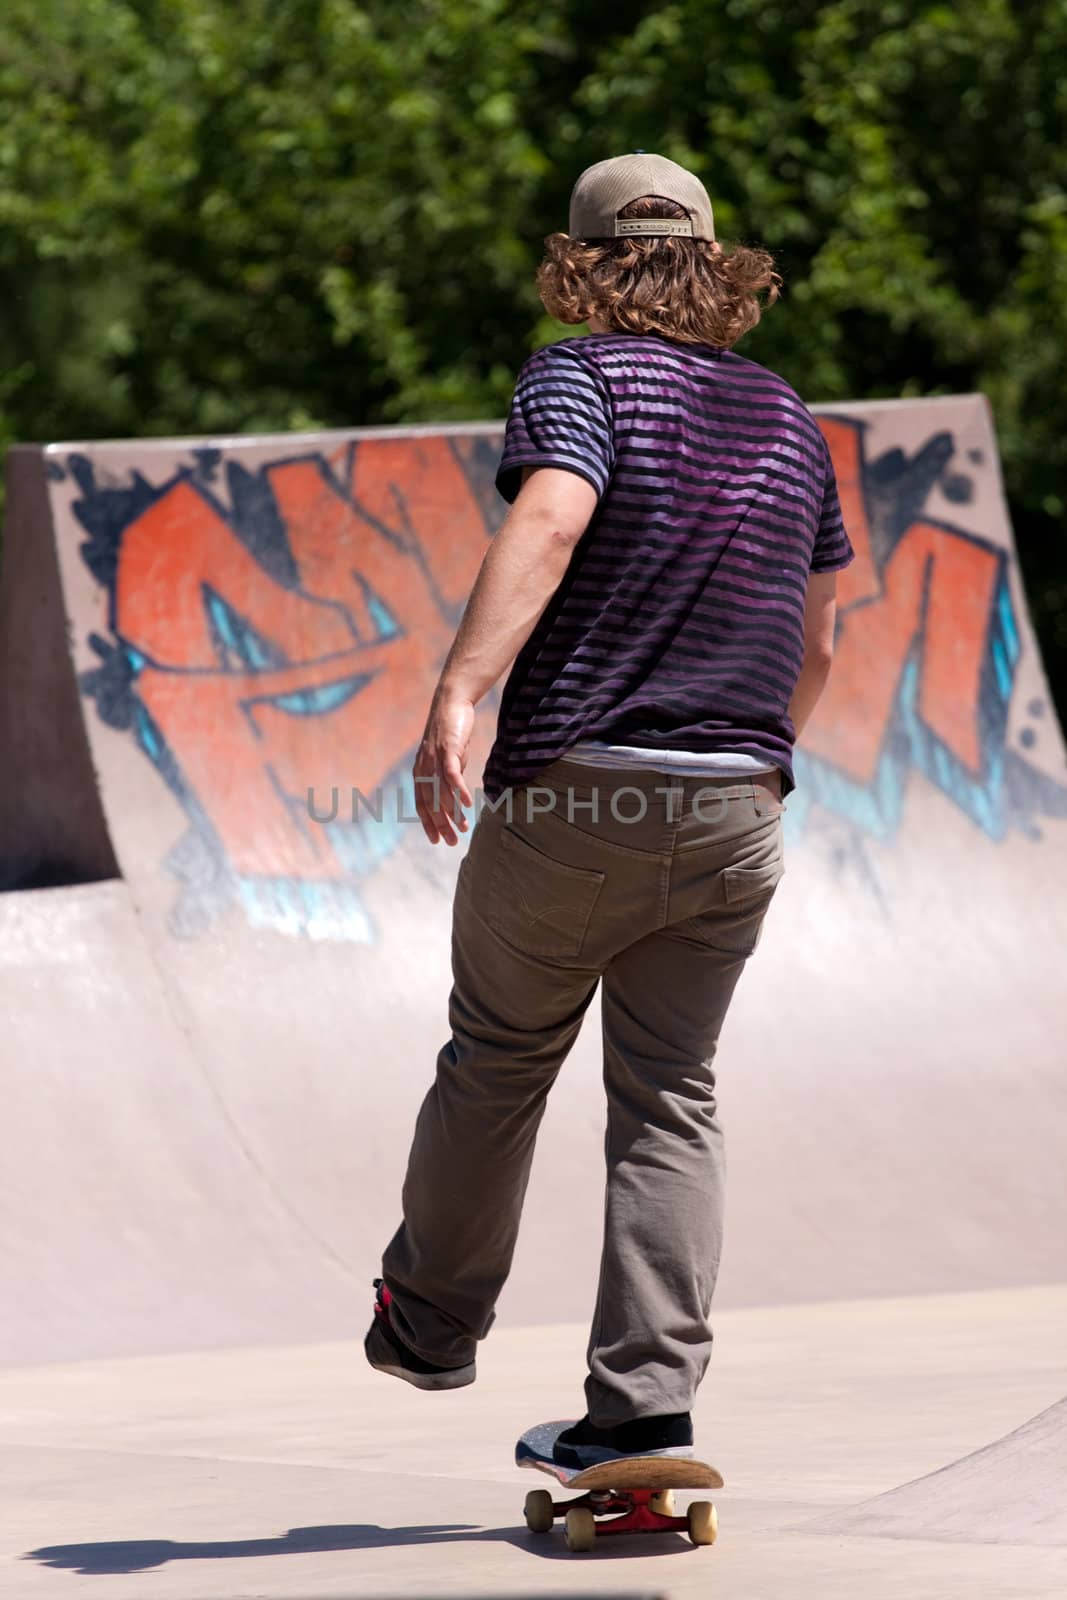 Action shot of a skateboarder skating at the skate park towards the concrete ramps.